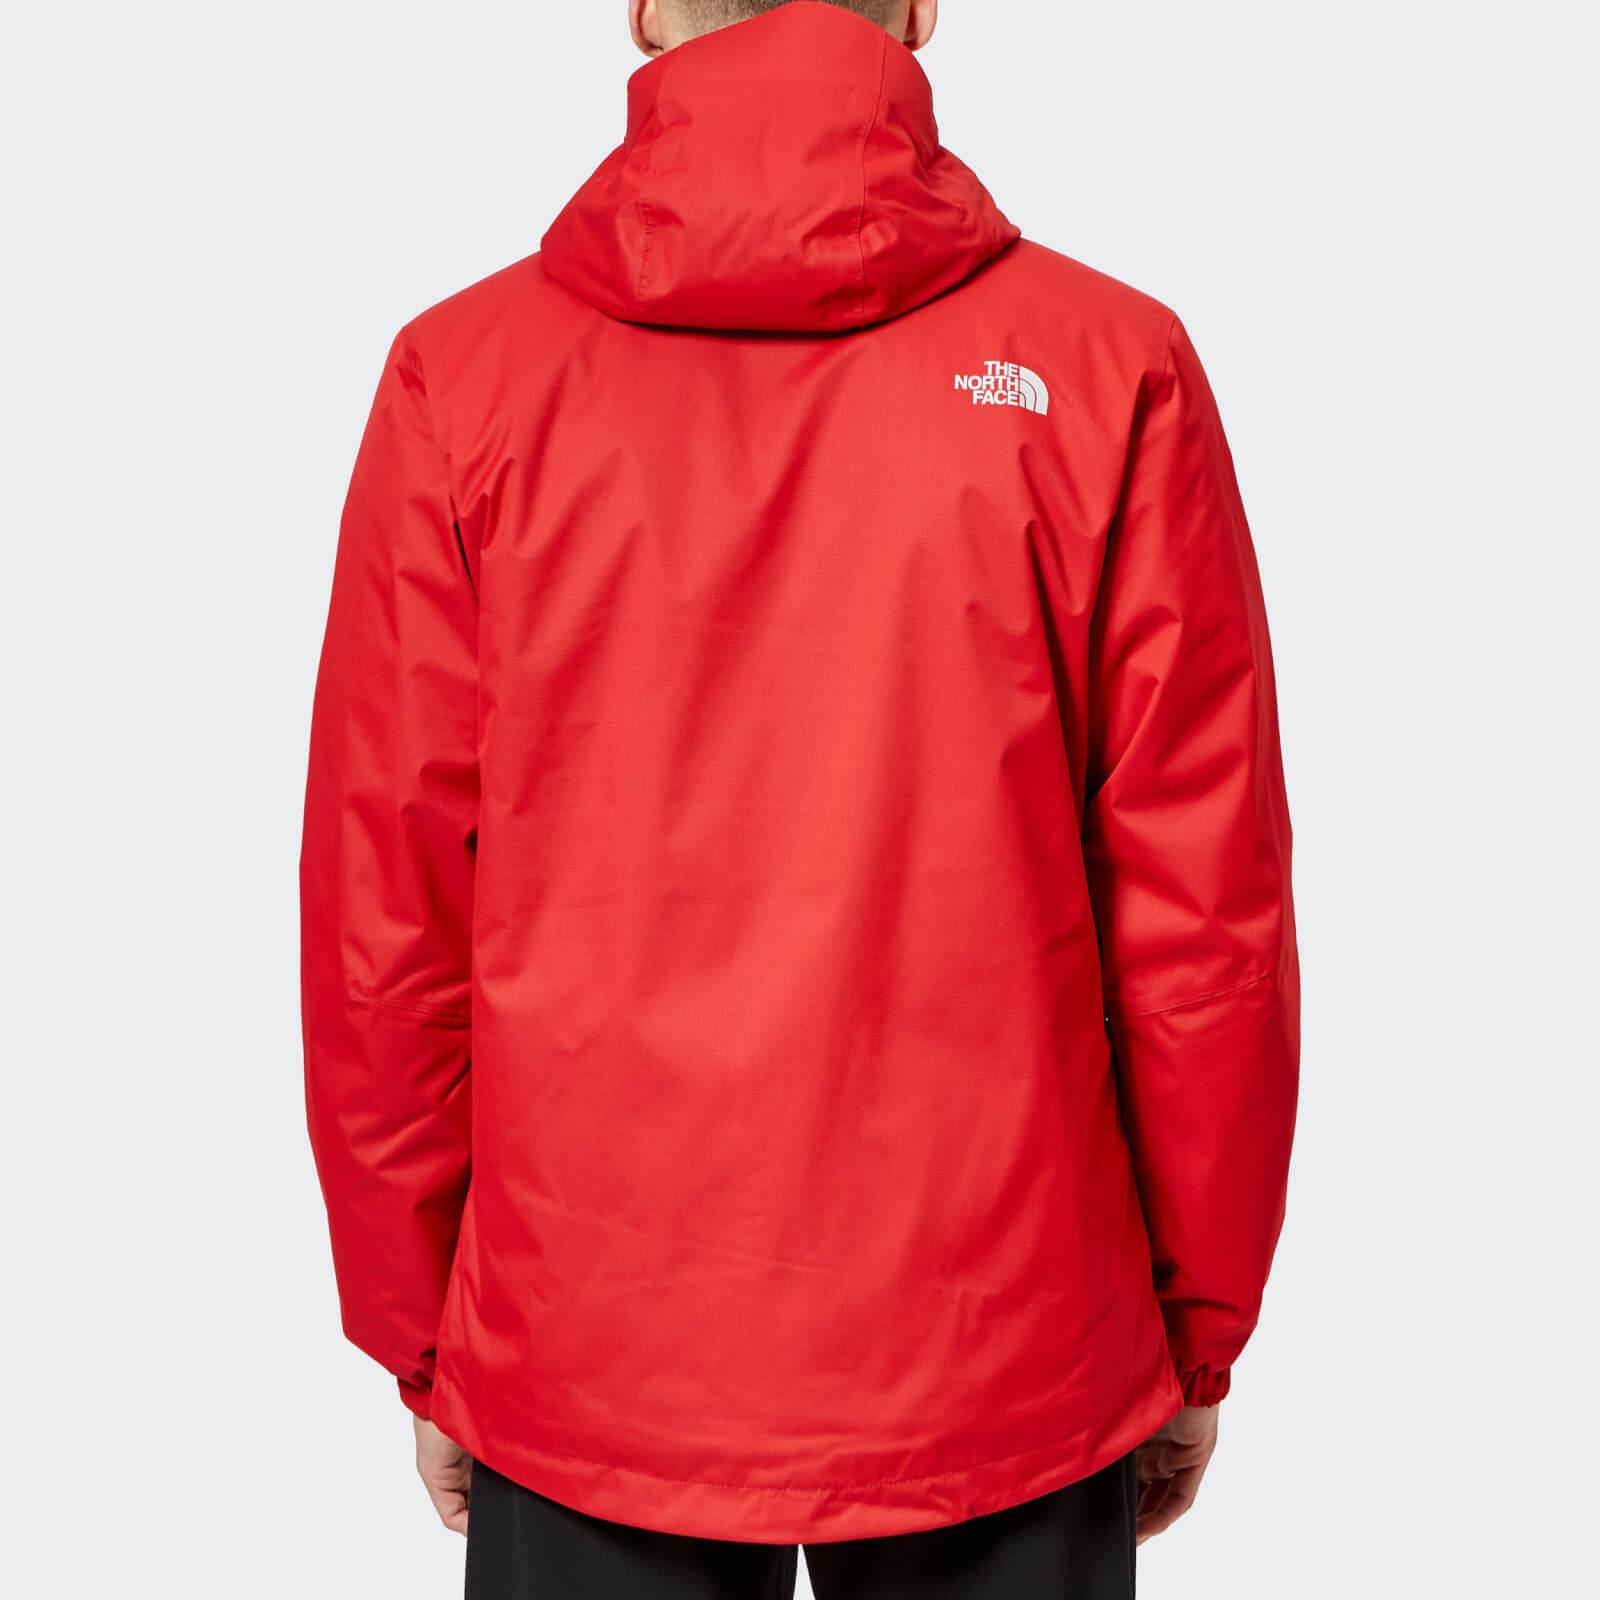 The North Face Synthetic Quest Insulated Jacket in Red for Men - Lyst